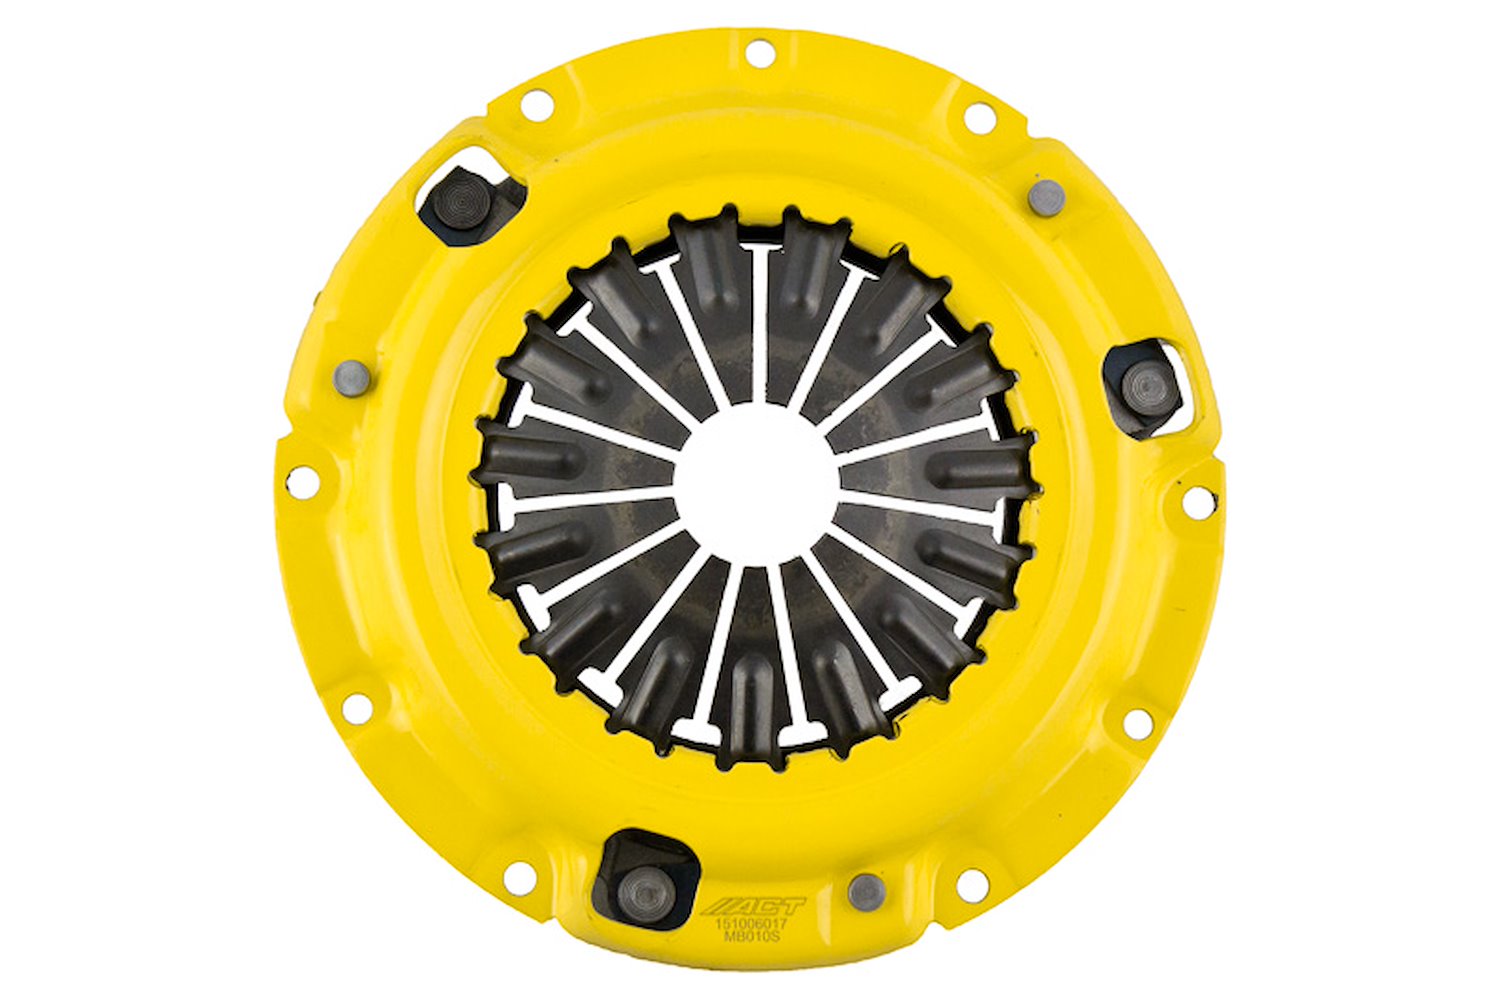 Sport Transmission Clutch Pressure Plate Fits Select Chrysler/Dodge/Eagle/Mitsubishi/Plymouth